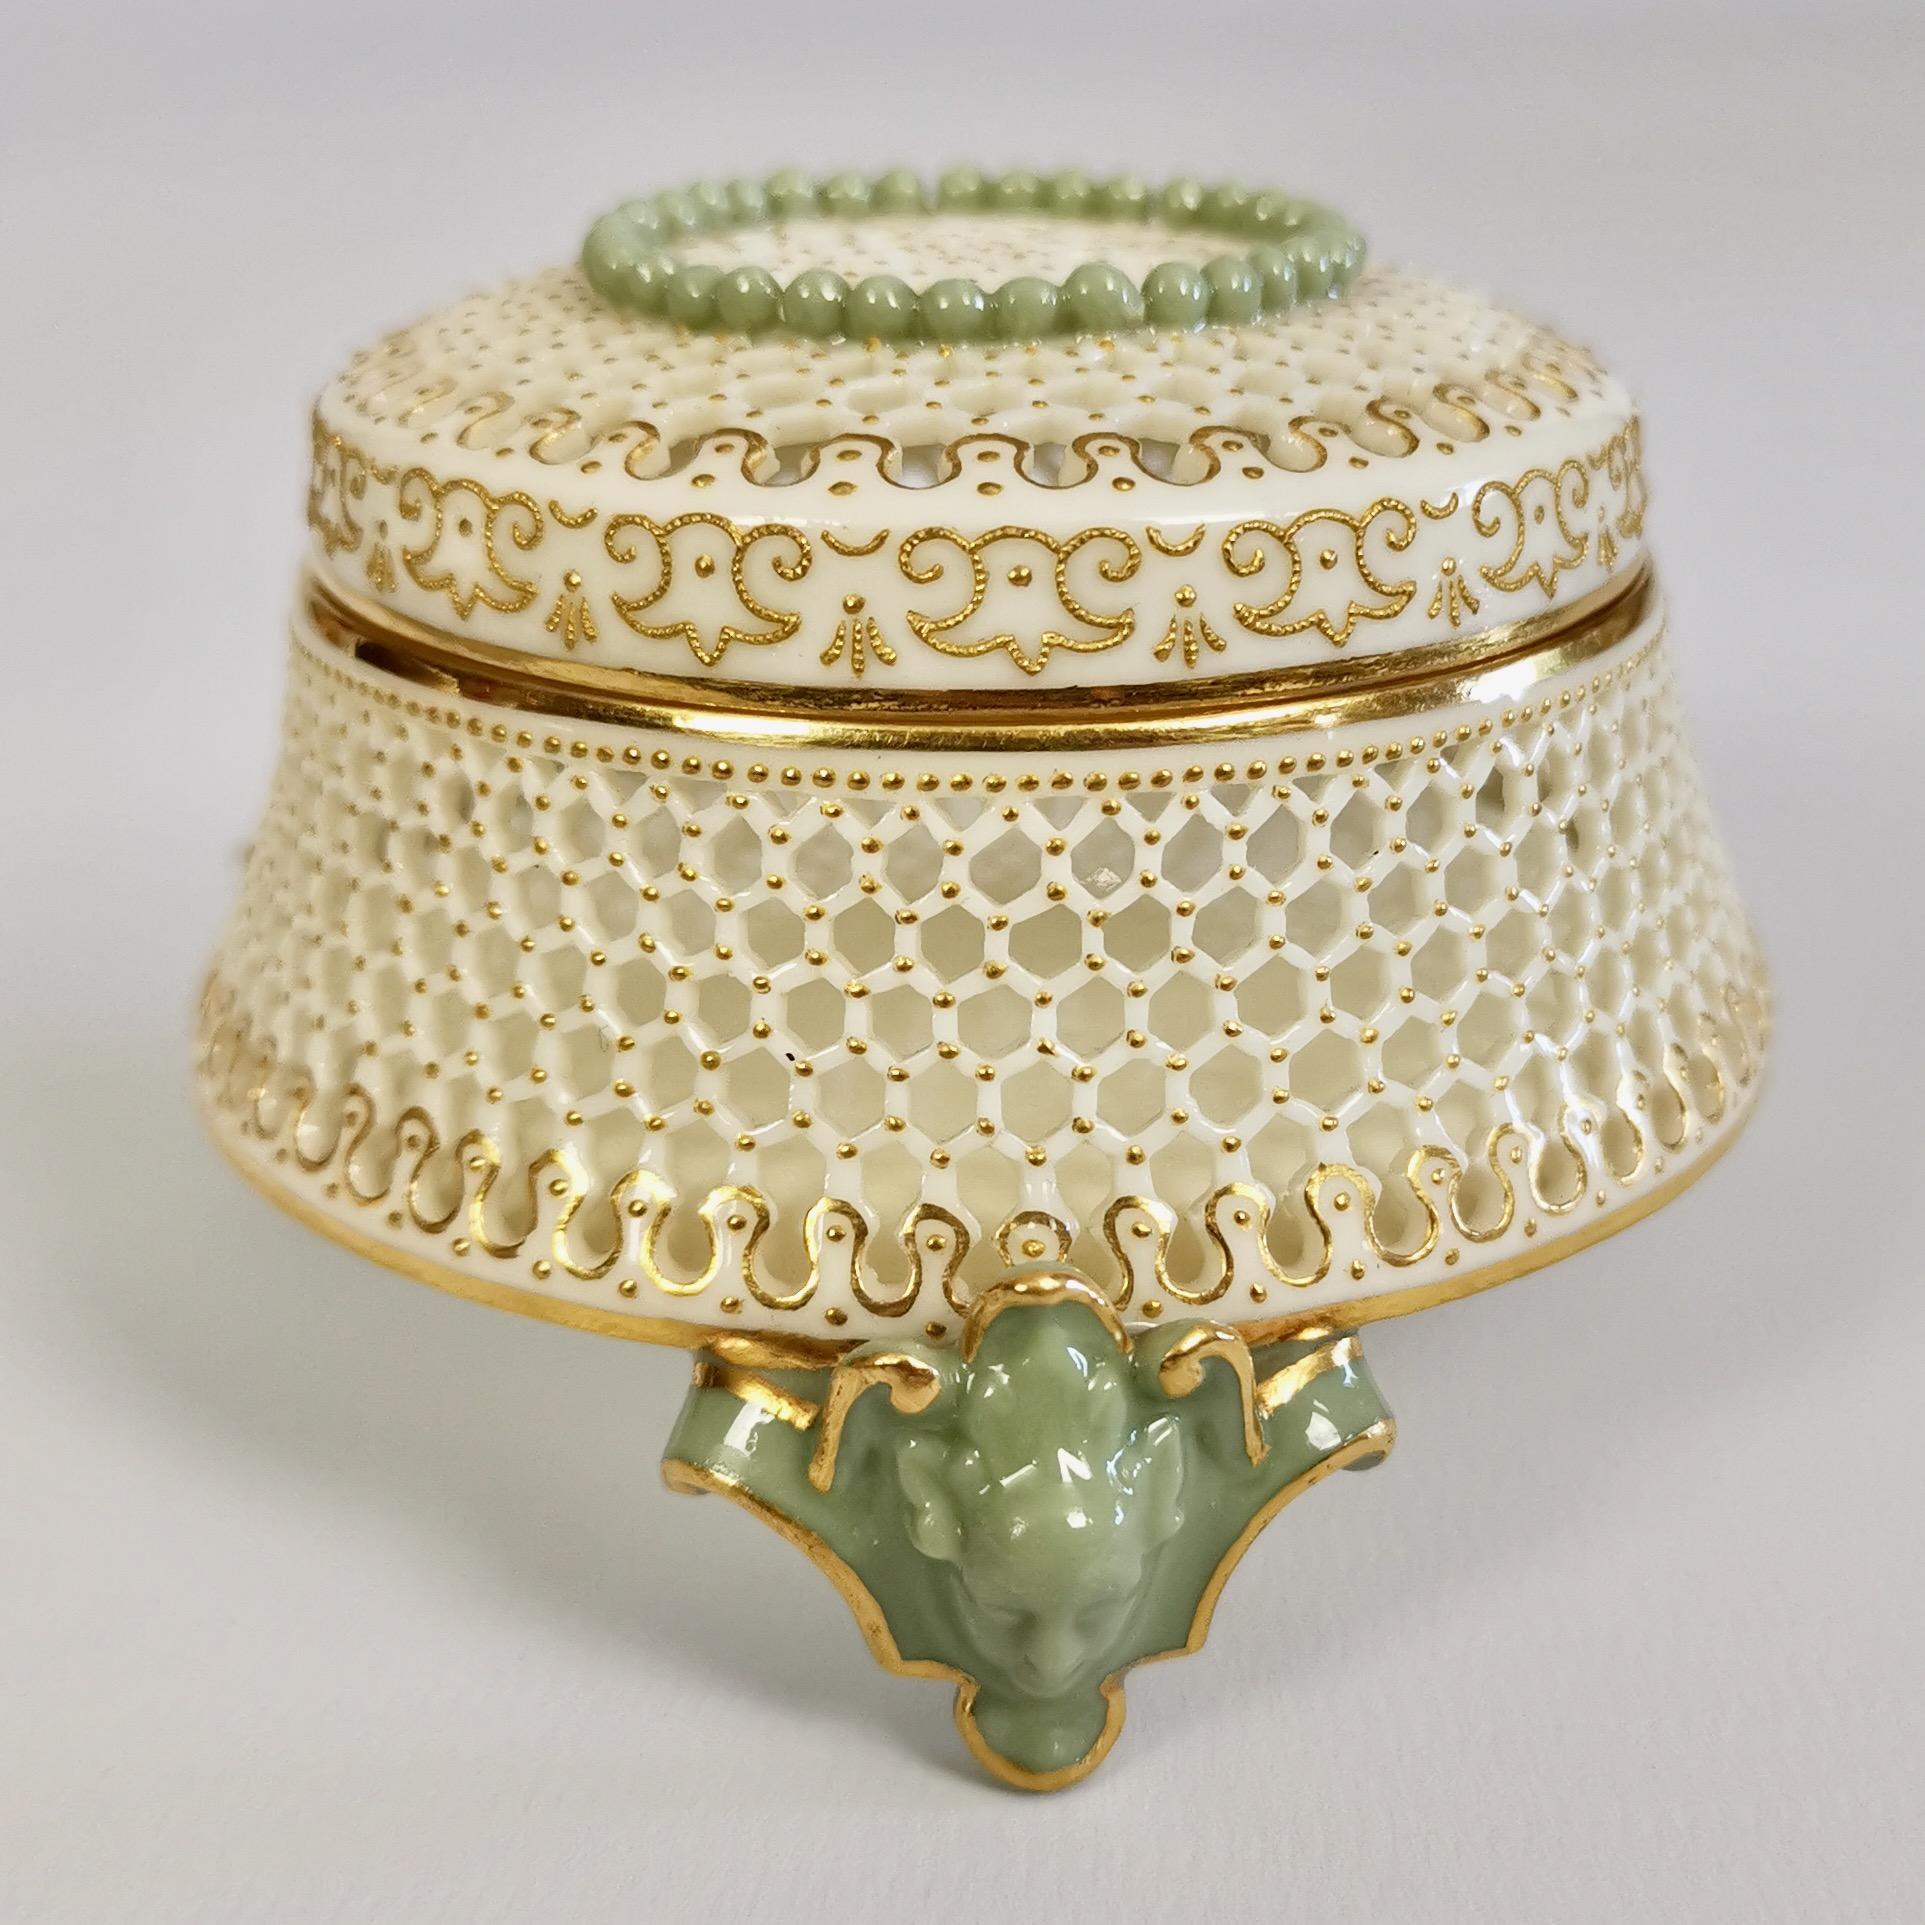 This is an important and sublimely made candy box and cover created by George Owen at Royal Worcester in the year 1909. The box is delicately reticulated (pierced), stands on three masked celadon feet and has very fine raised gilt patterns.

The